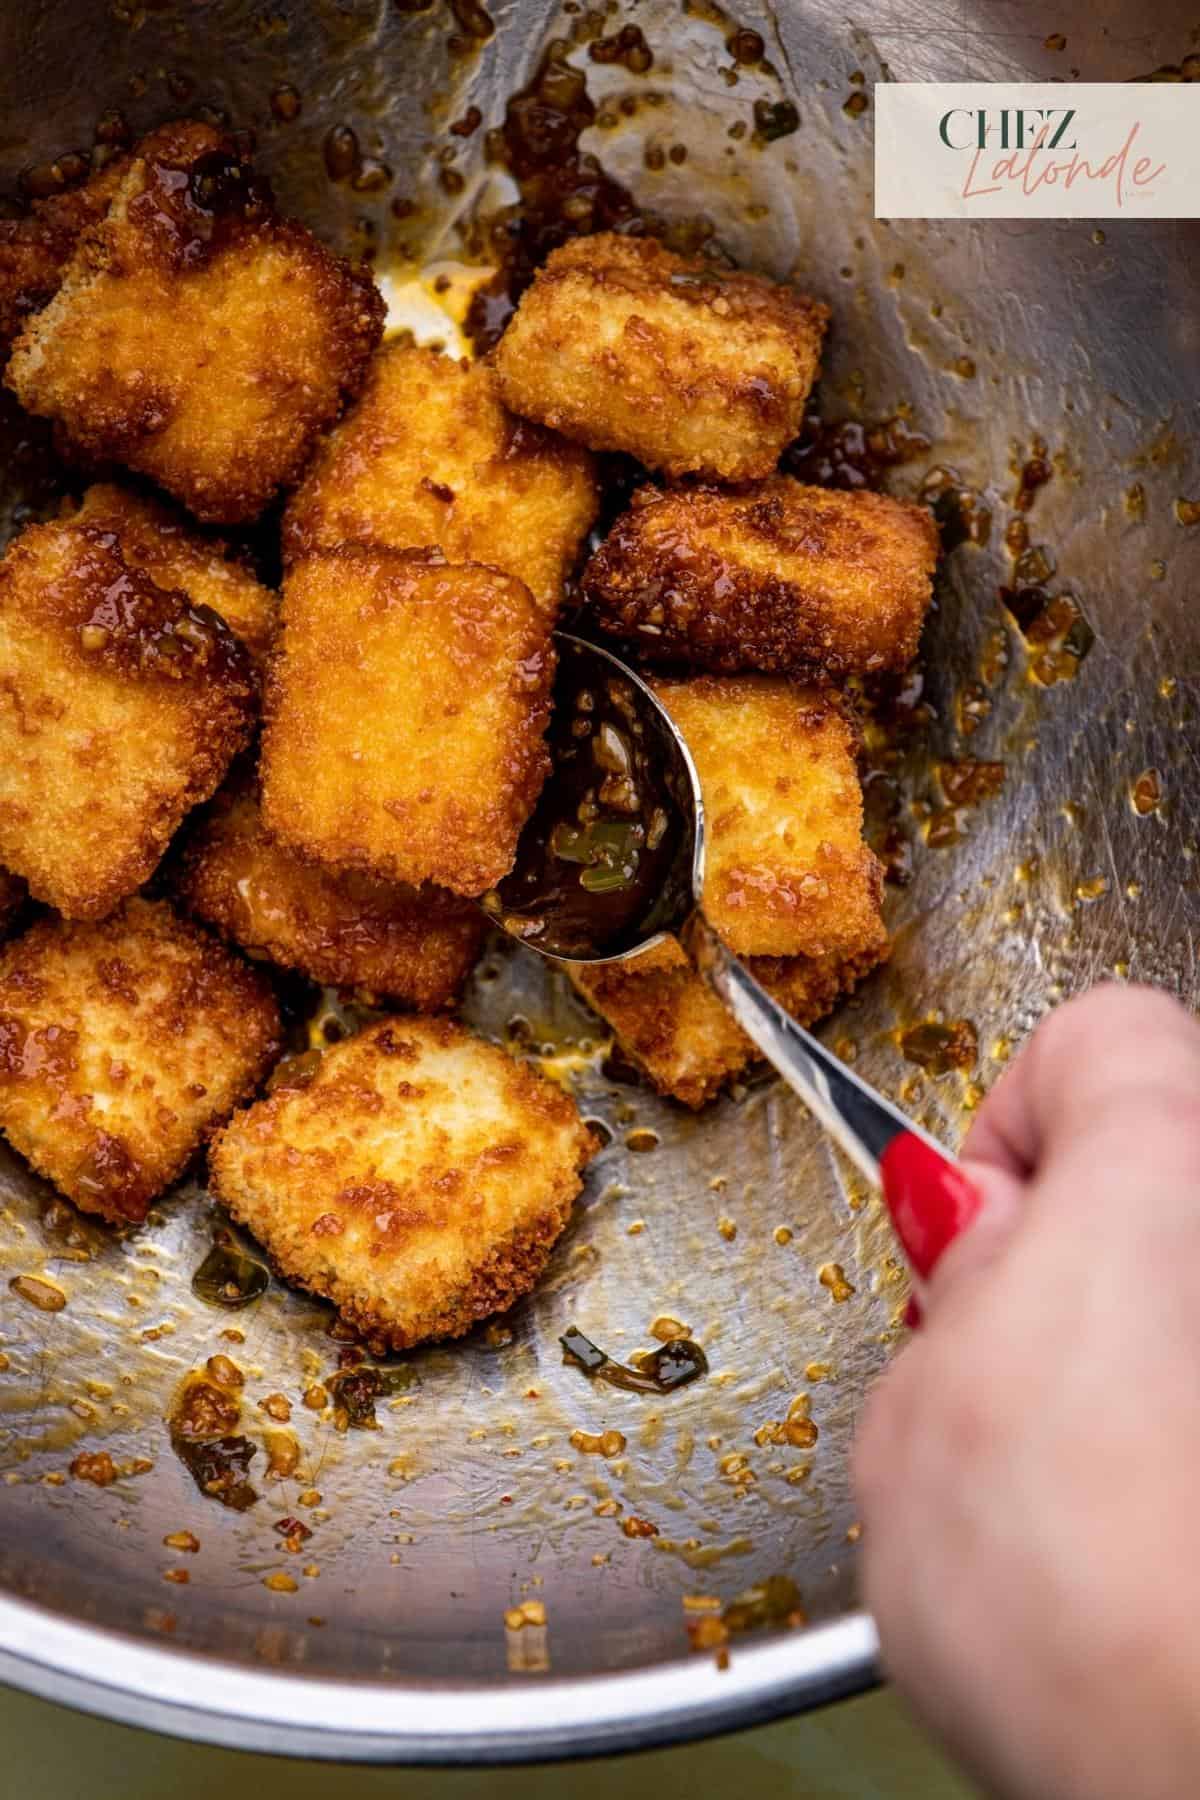 Mix Asian garlic sauce with tofu and make sure they are all coated well.